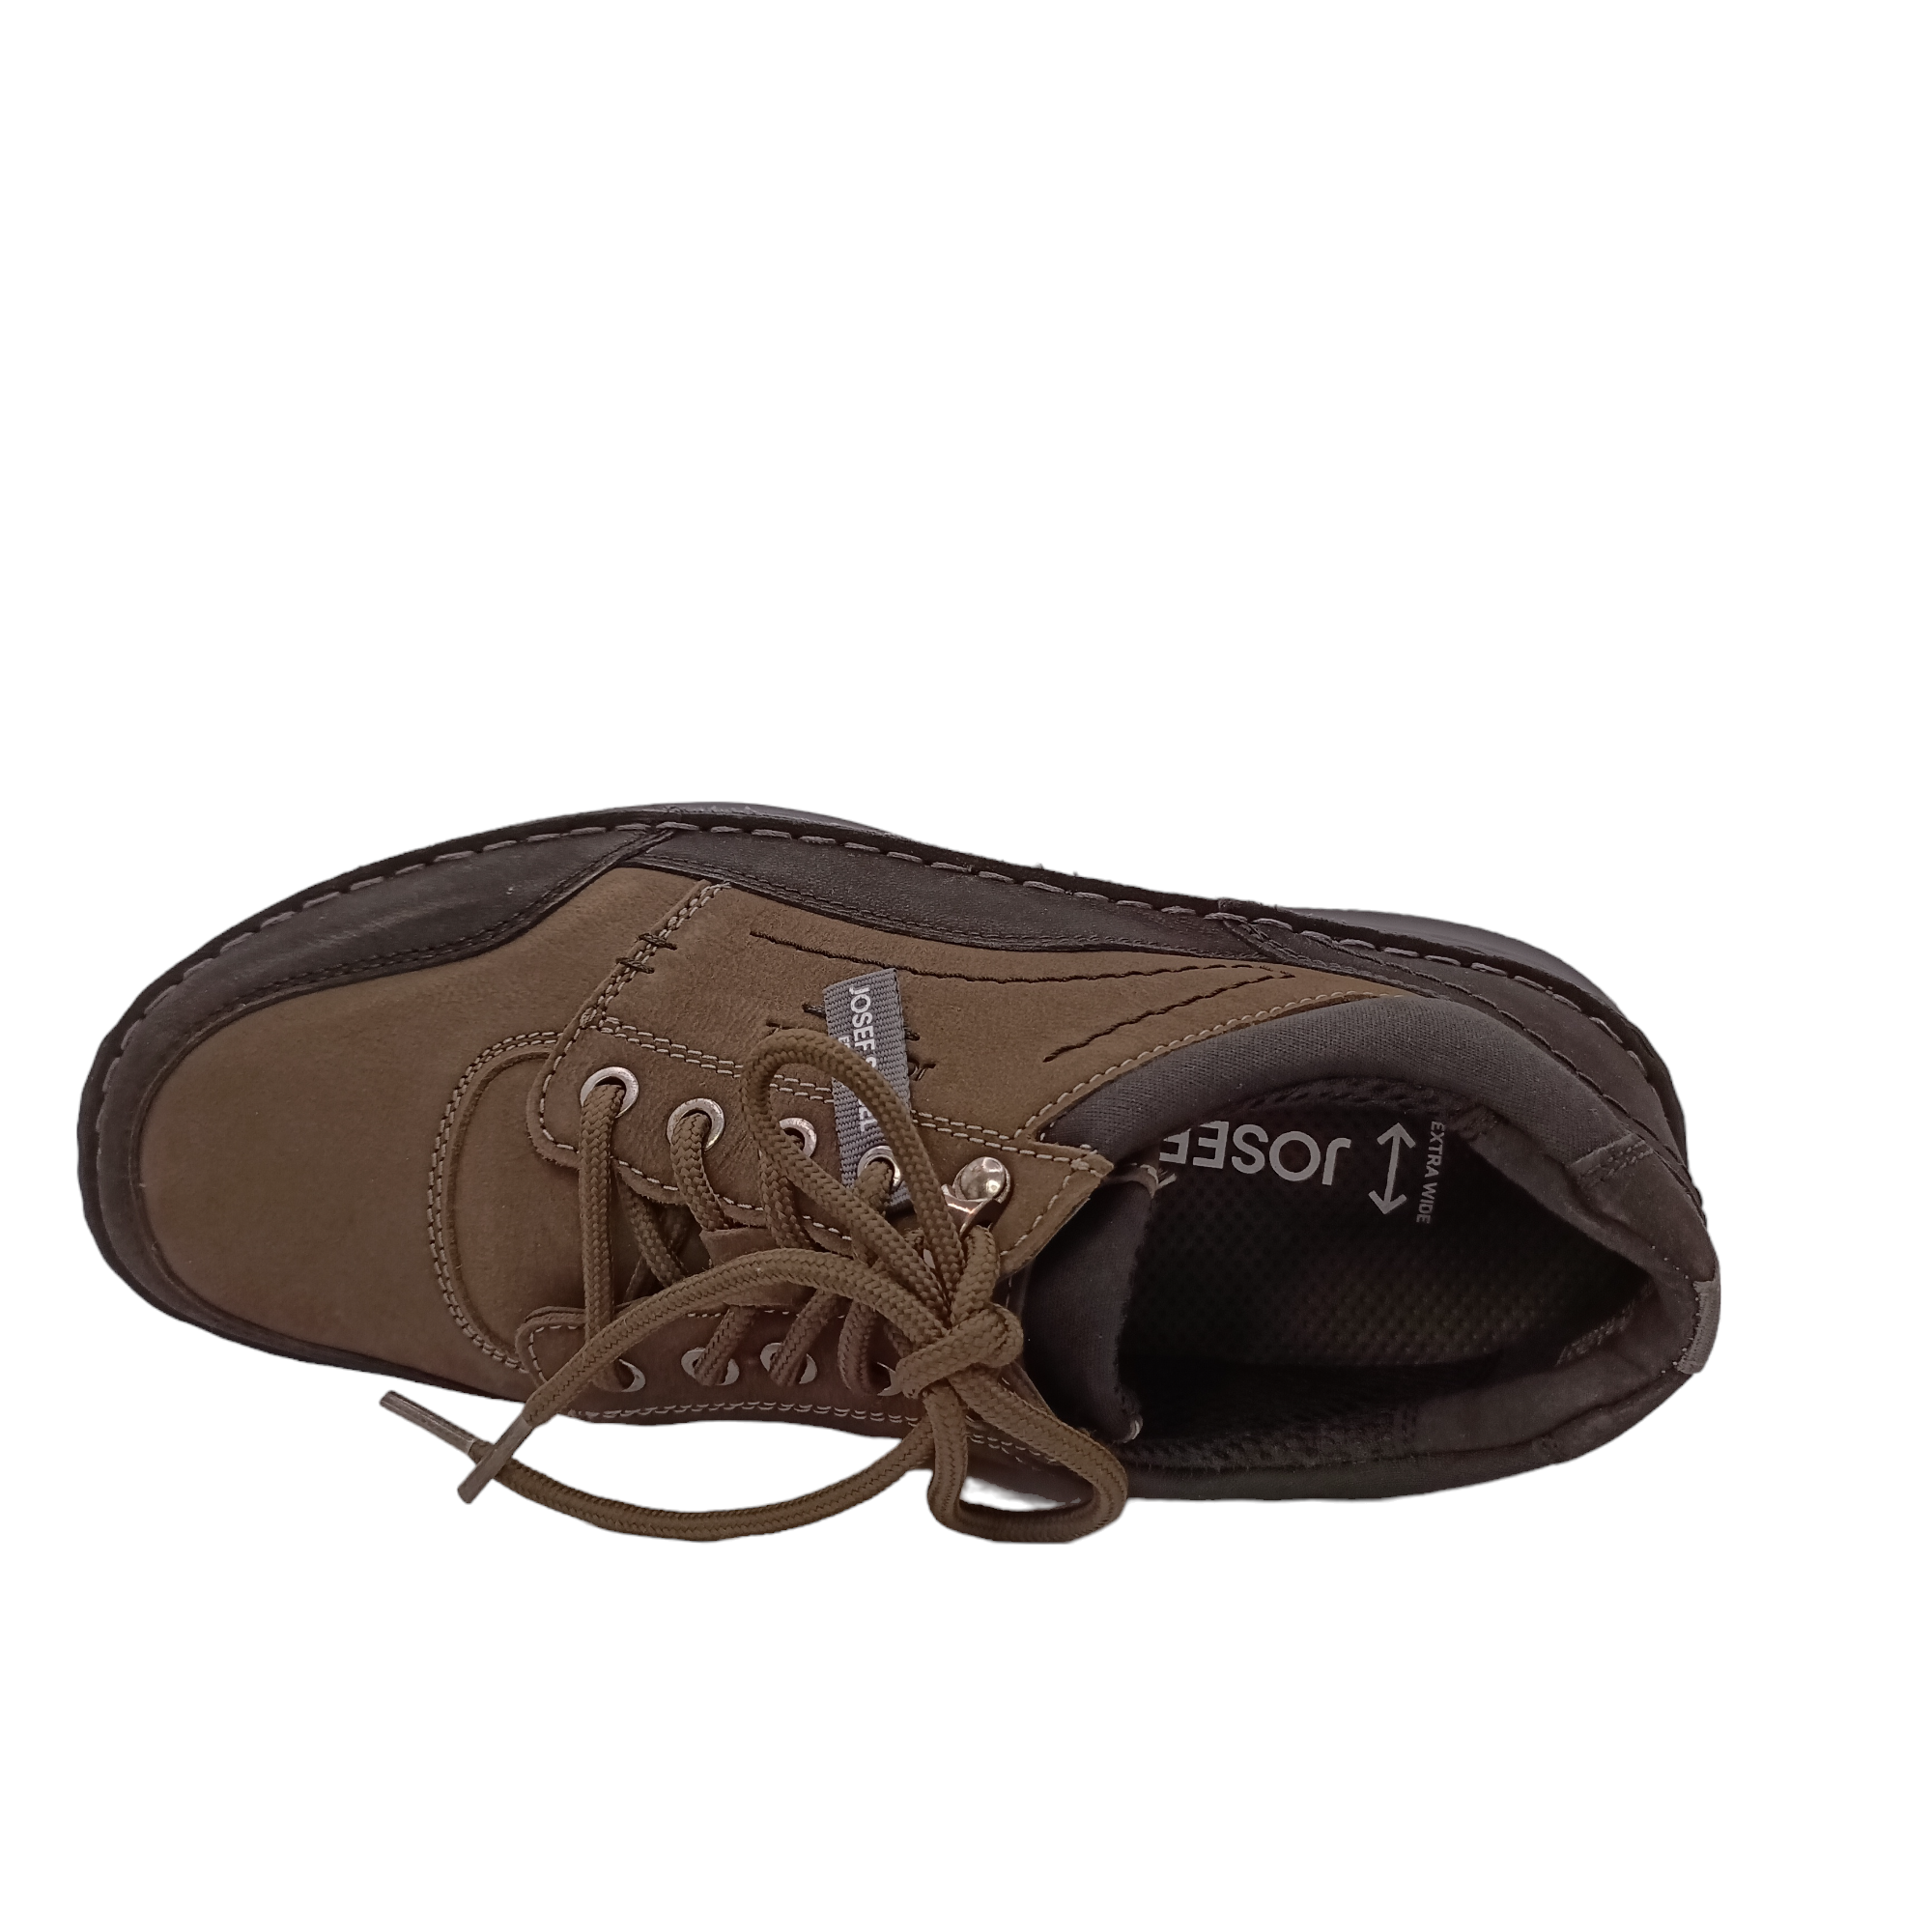 Shop Anvers 98 Josef Seibel - with shoe&amp;me - from Josef Seibel - Shoes - Mens, shoes, Winter - [collection]